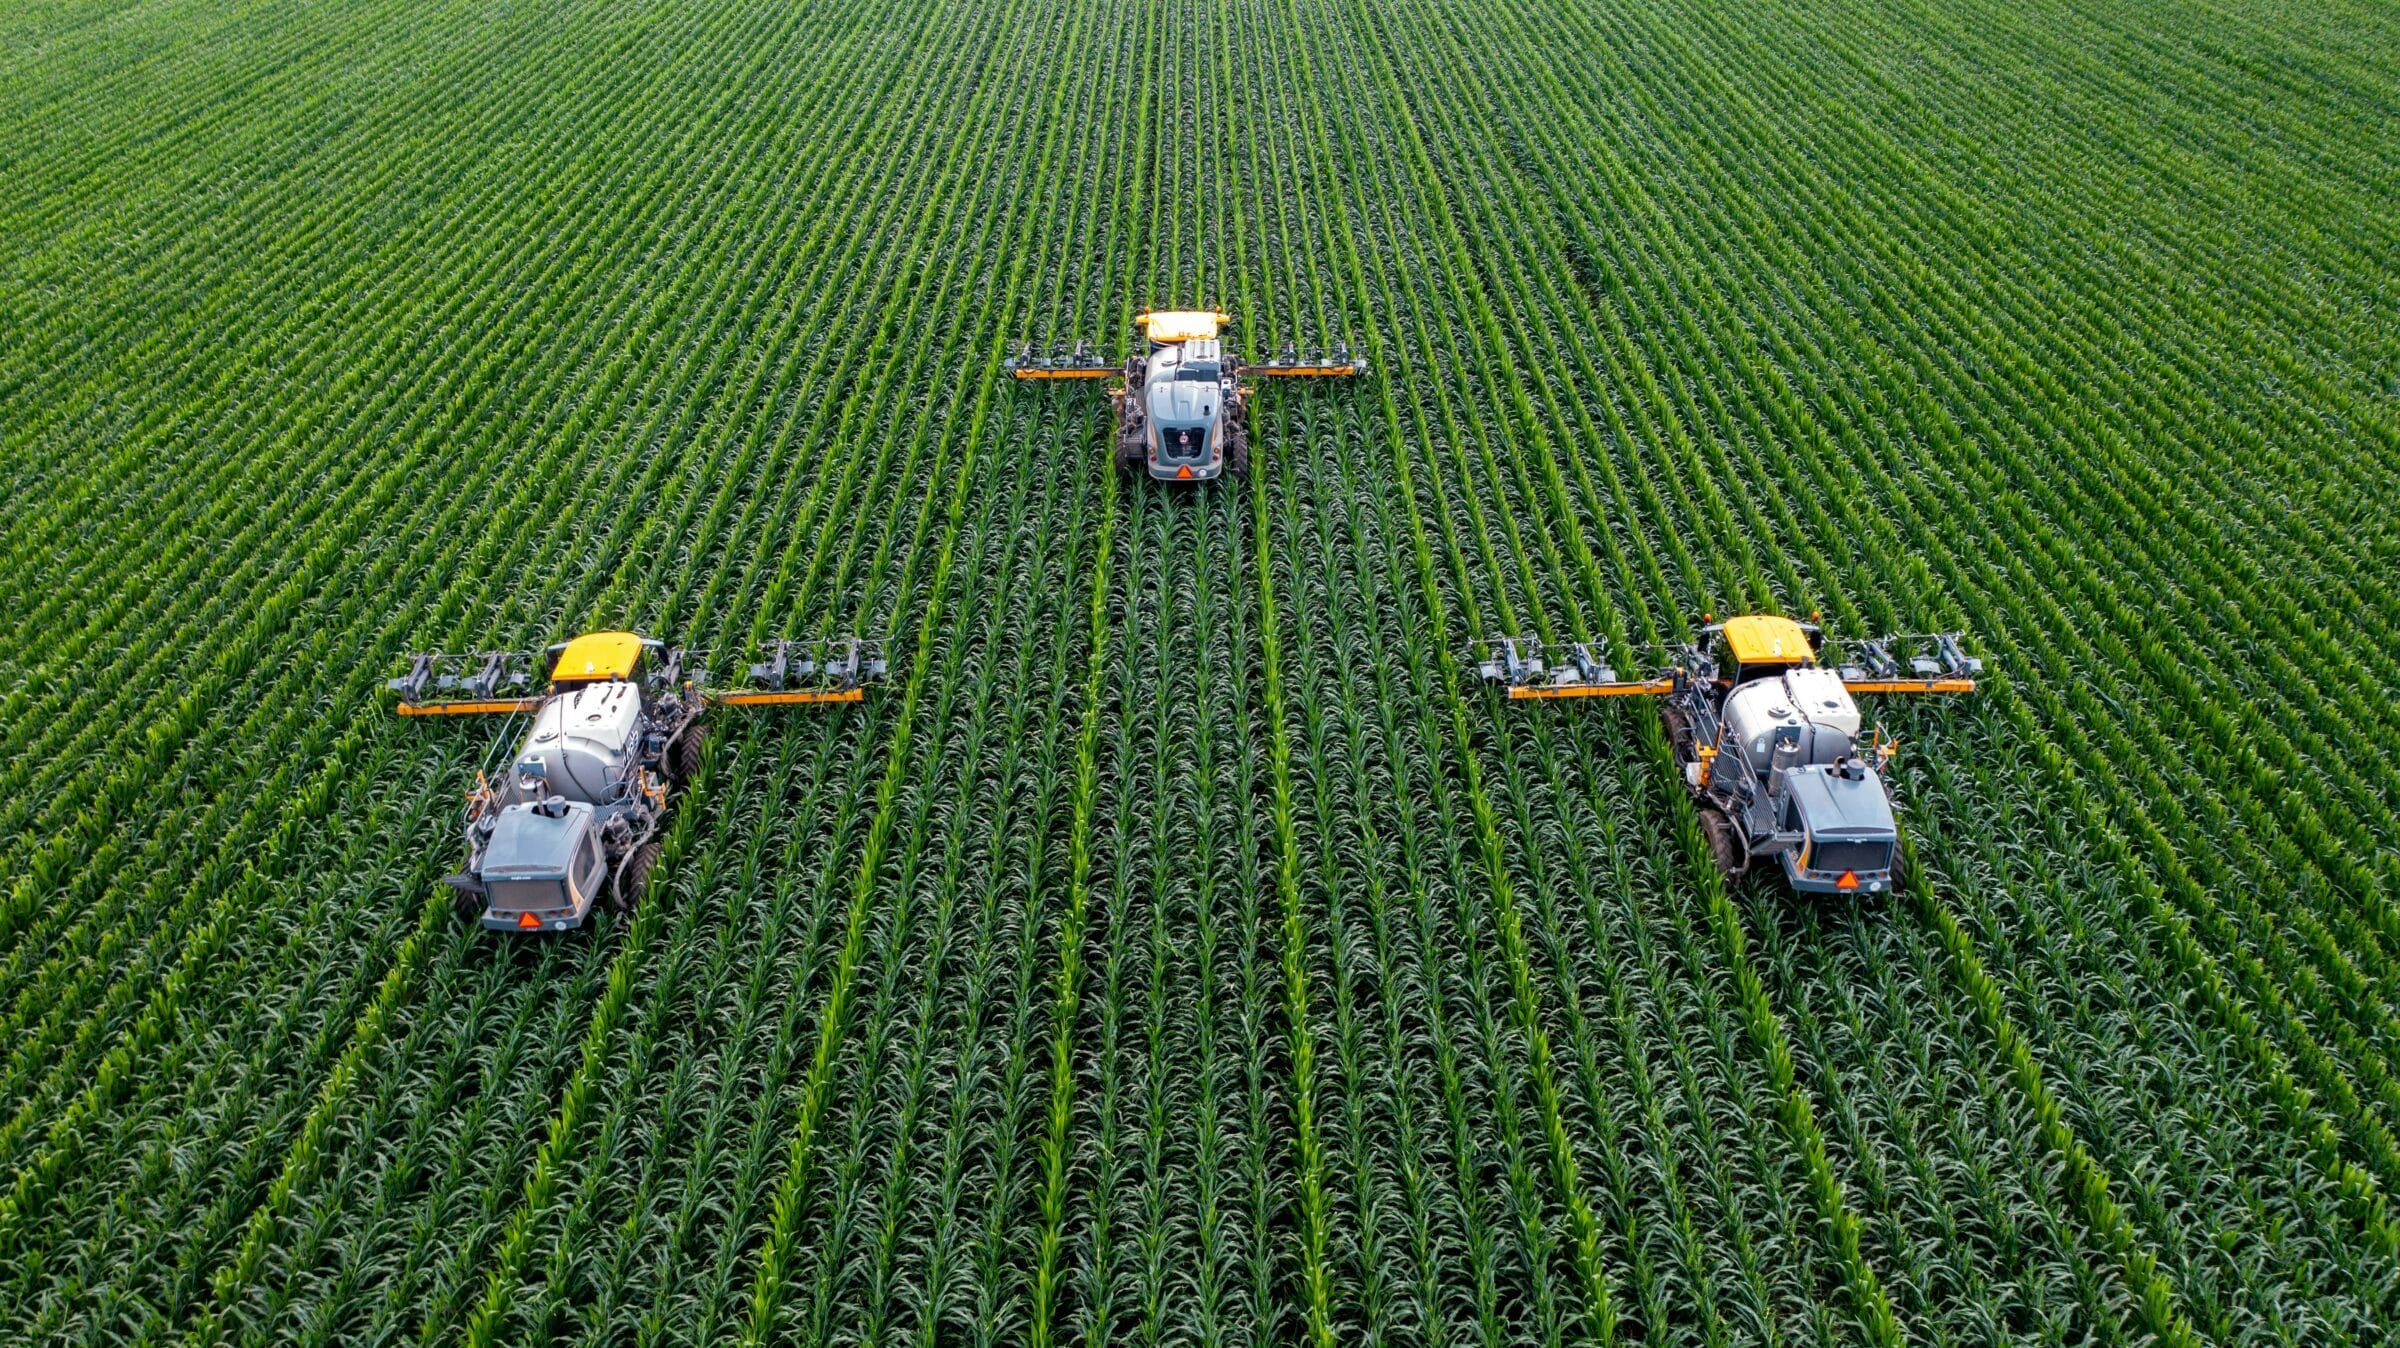 AIoT being used for smart agriculture